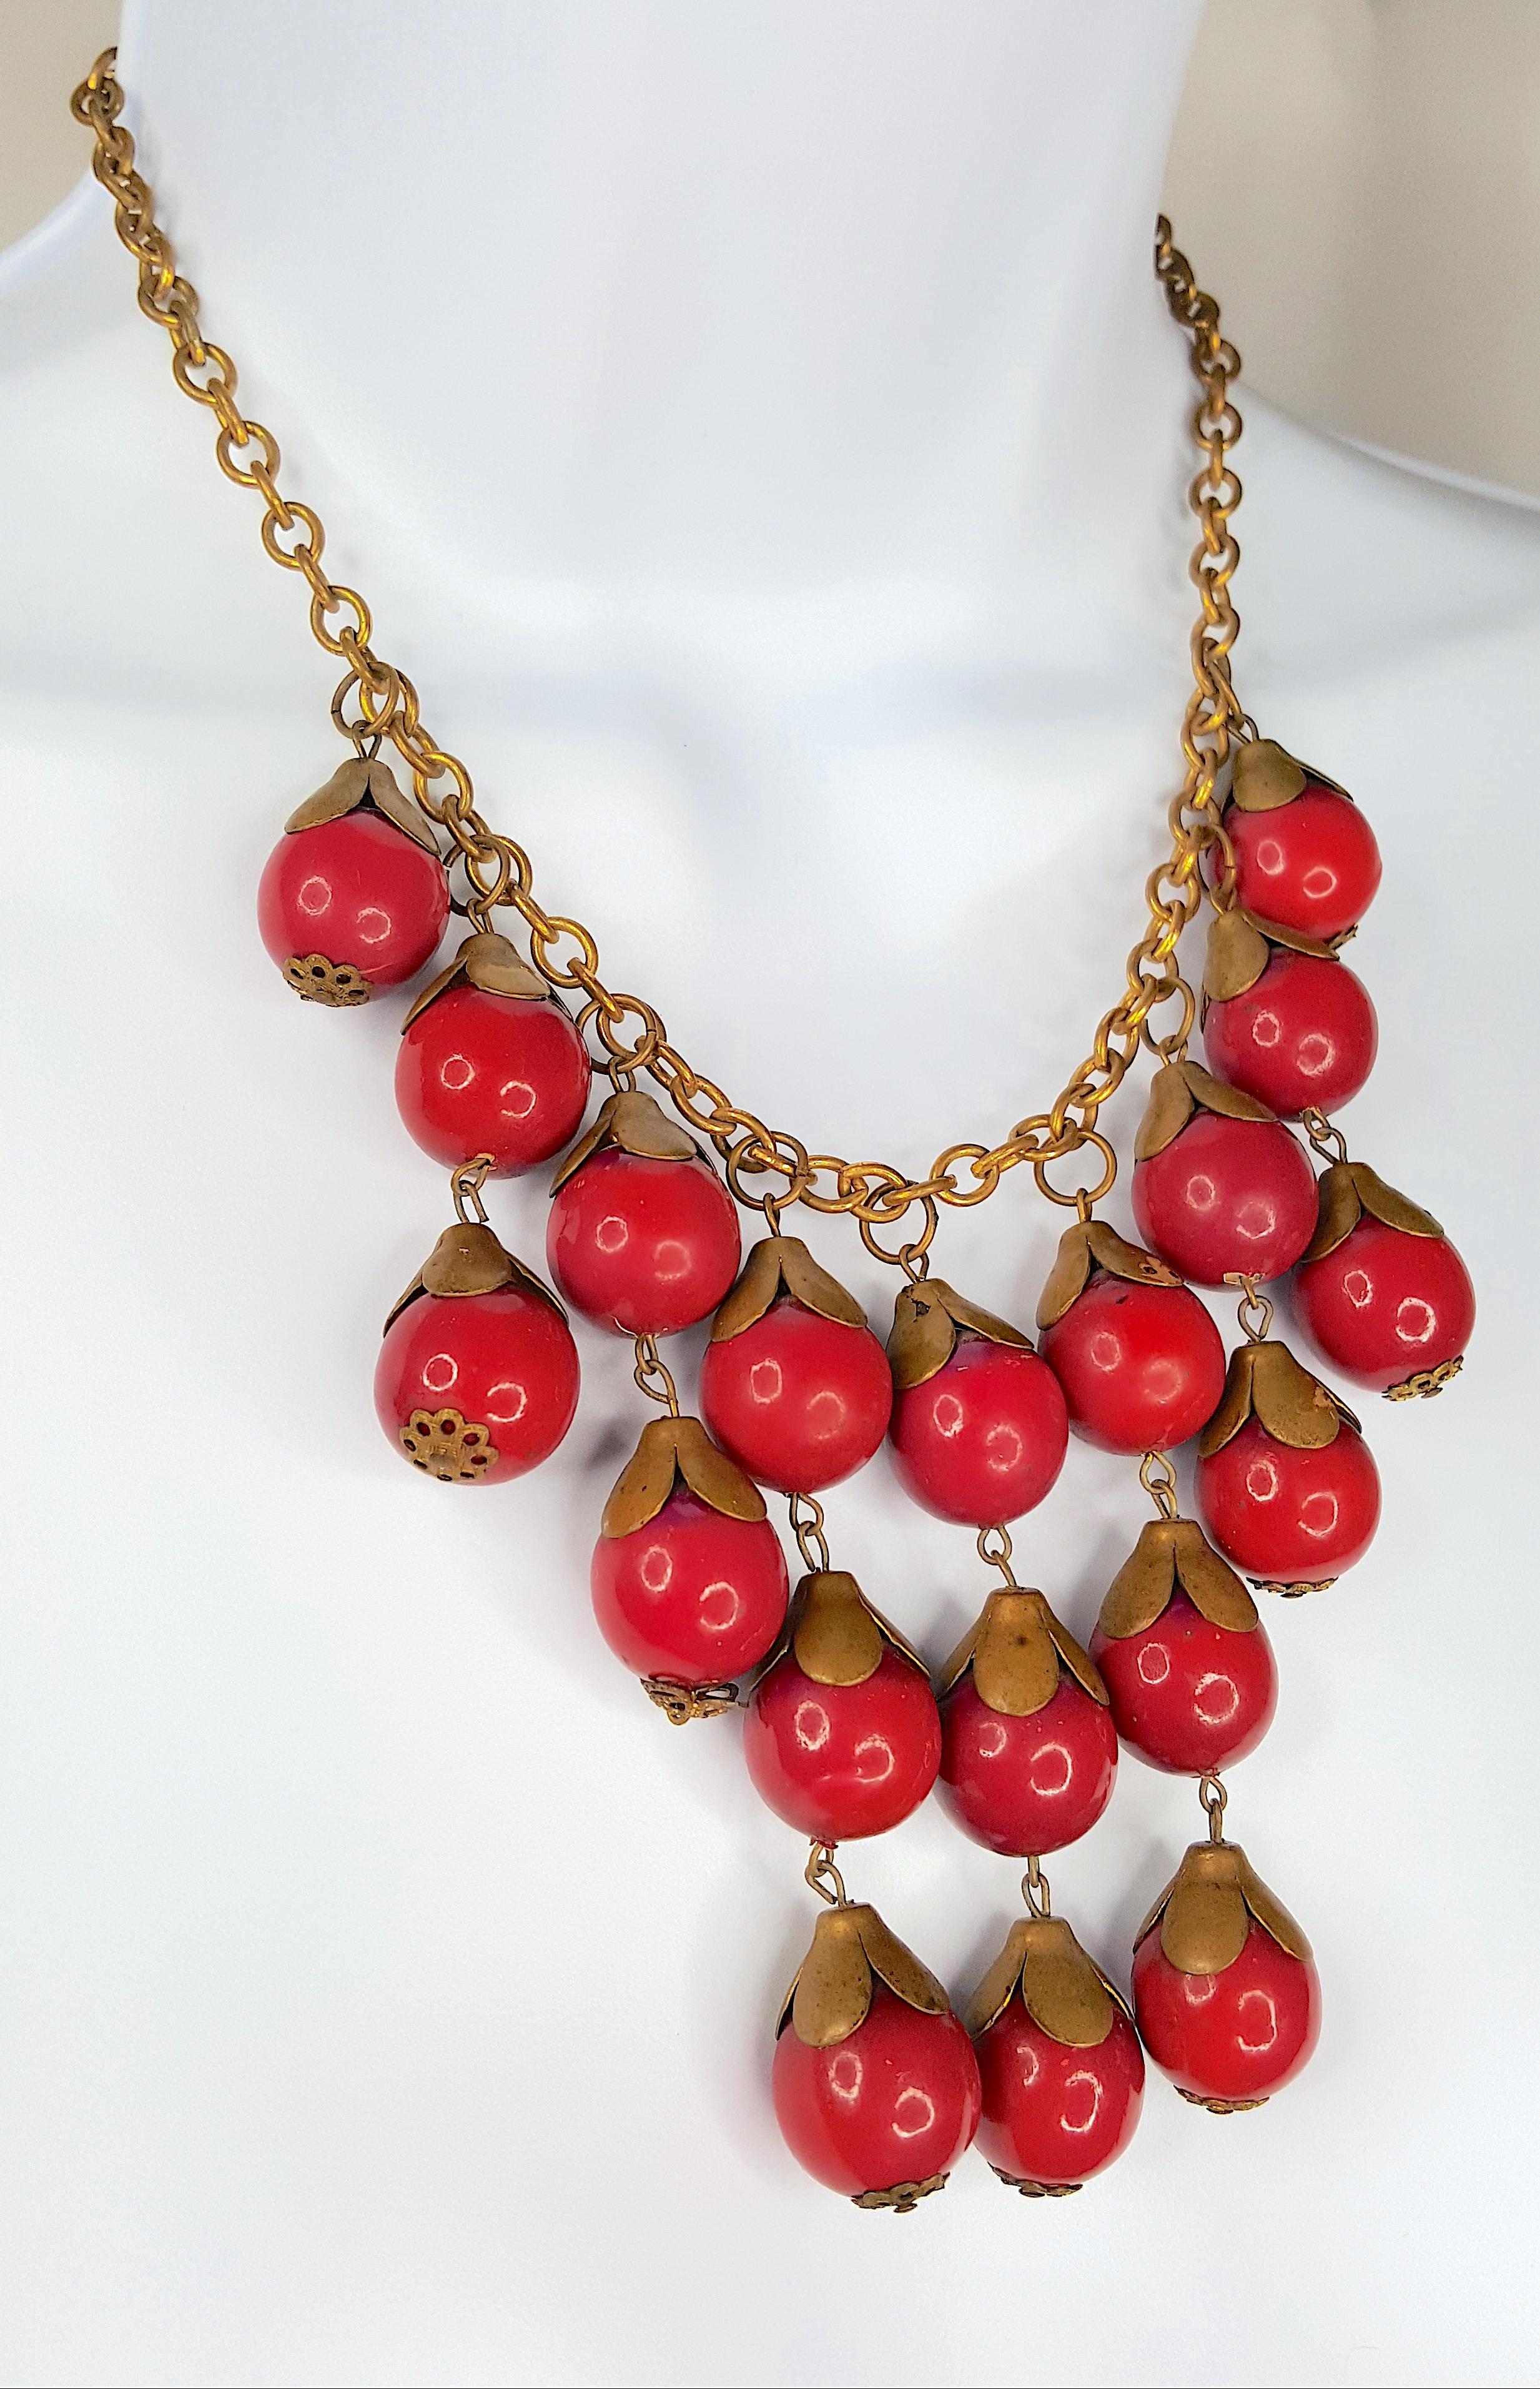 1930s Haskell FrankHess EnameledBrassCappedRedFruitPendants Bib Chain Necklace In Good Condition For Sale In Chicago, IL